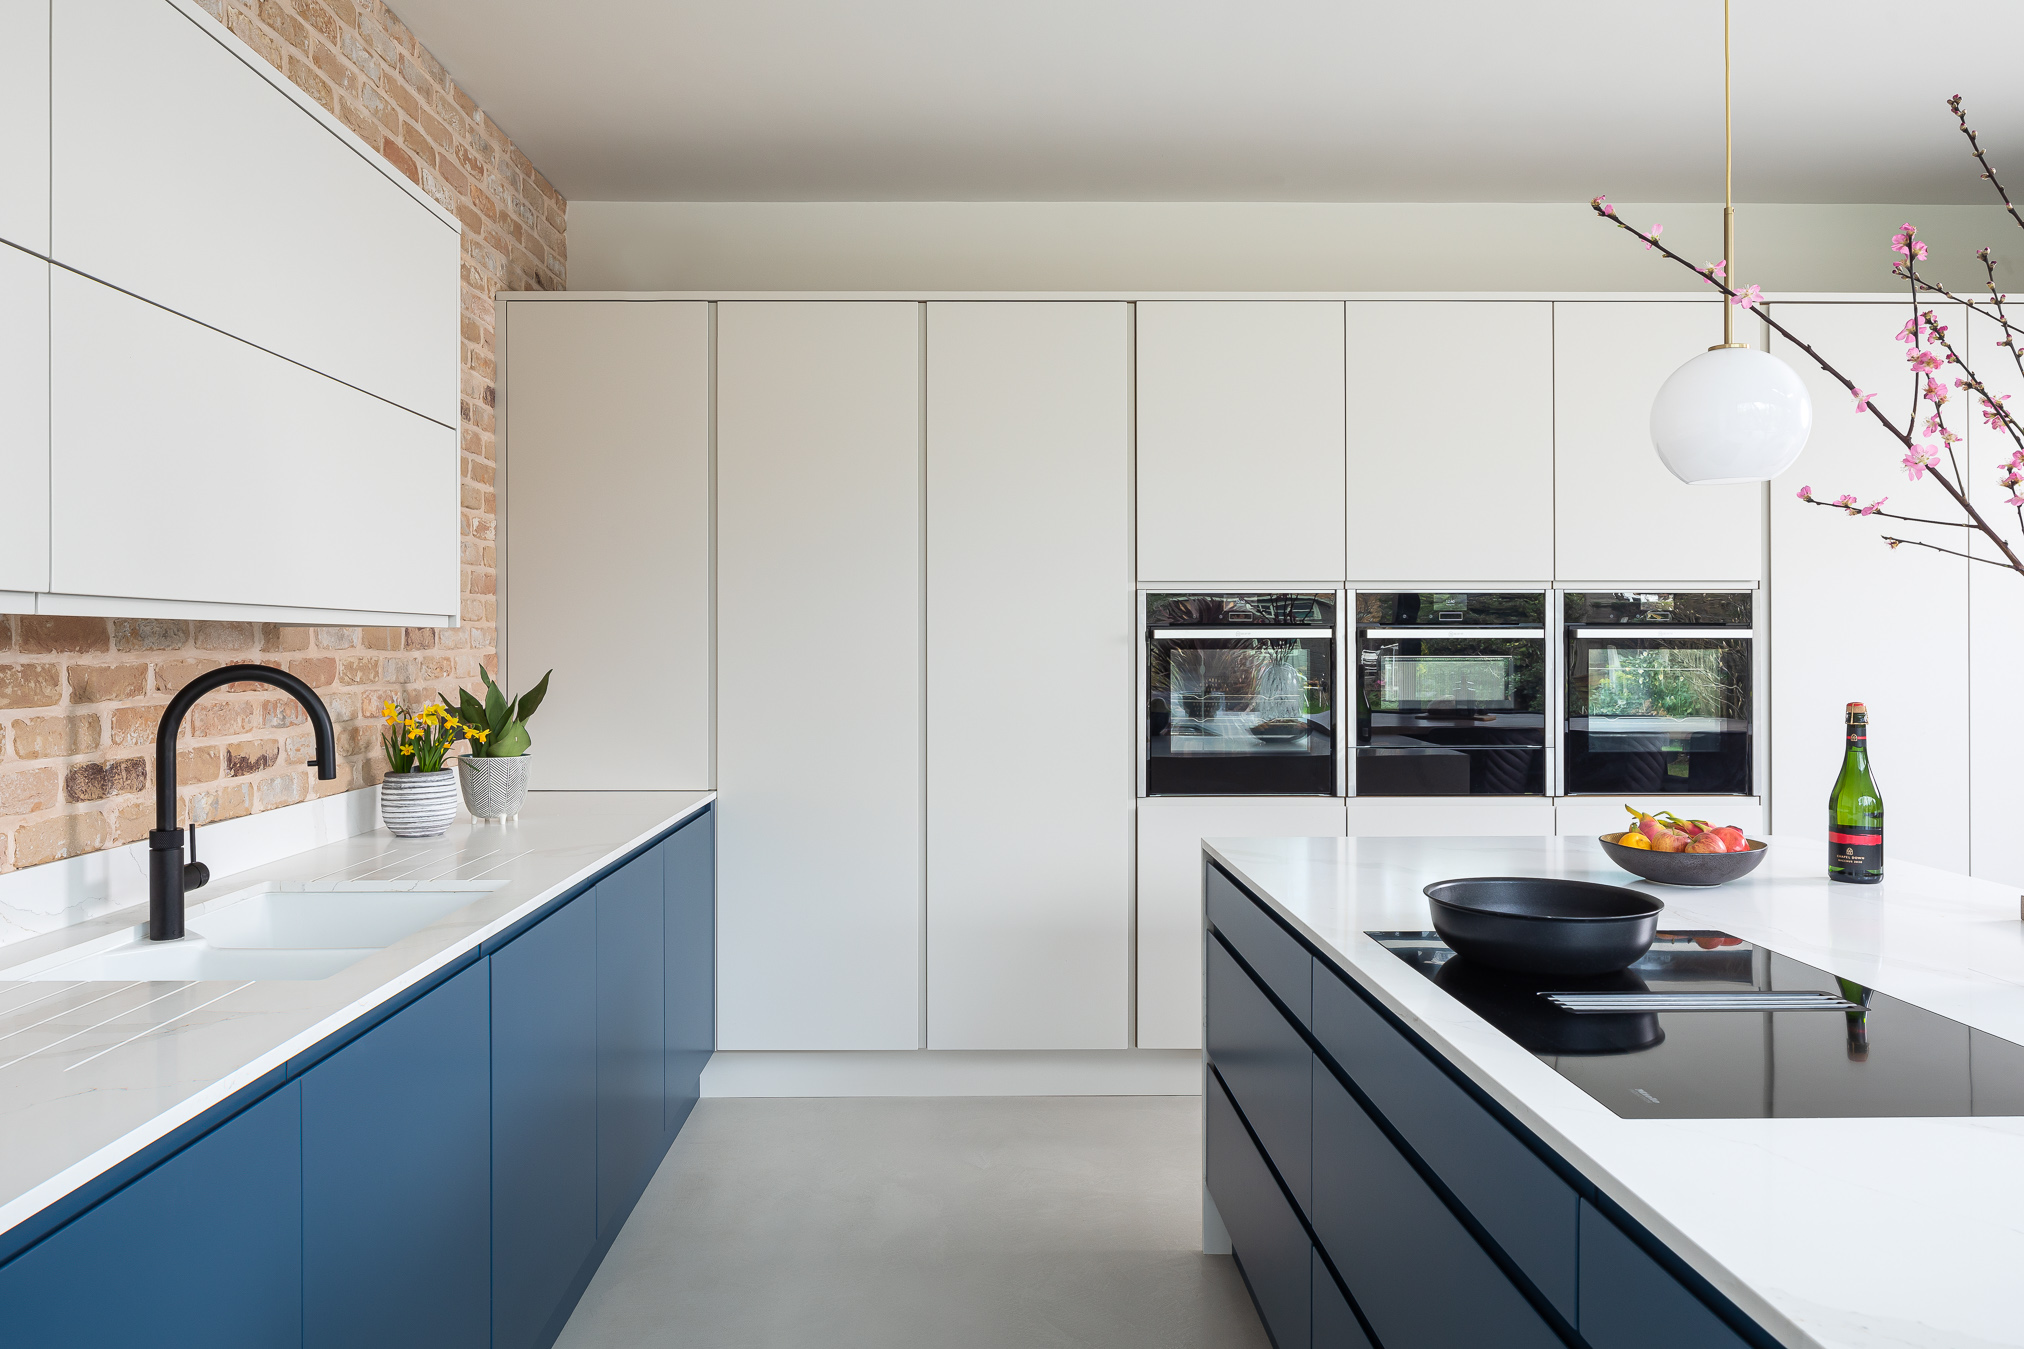 John Lewis of Hungerford luxury minimalist Pure kitchen in blue